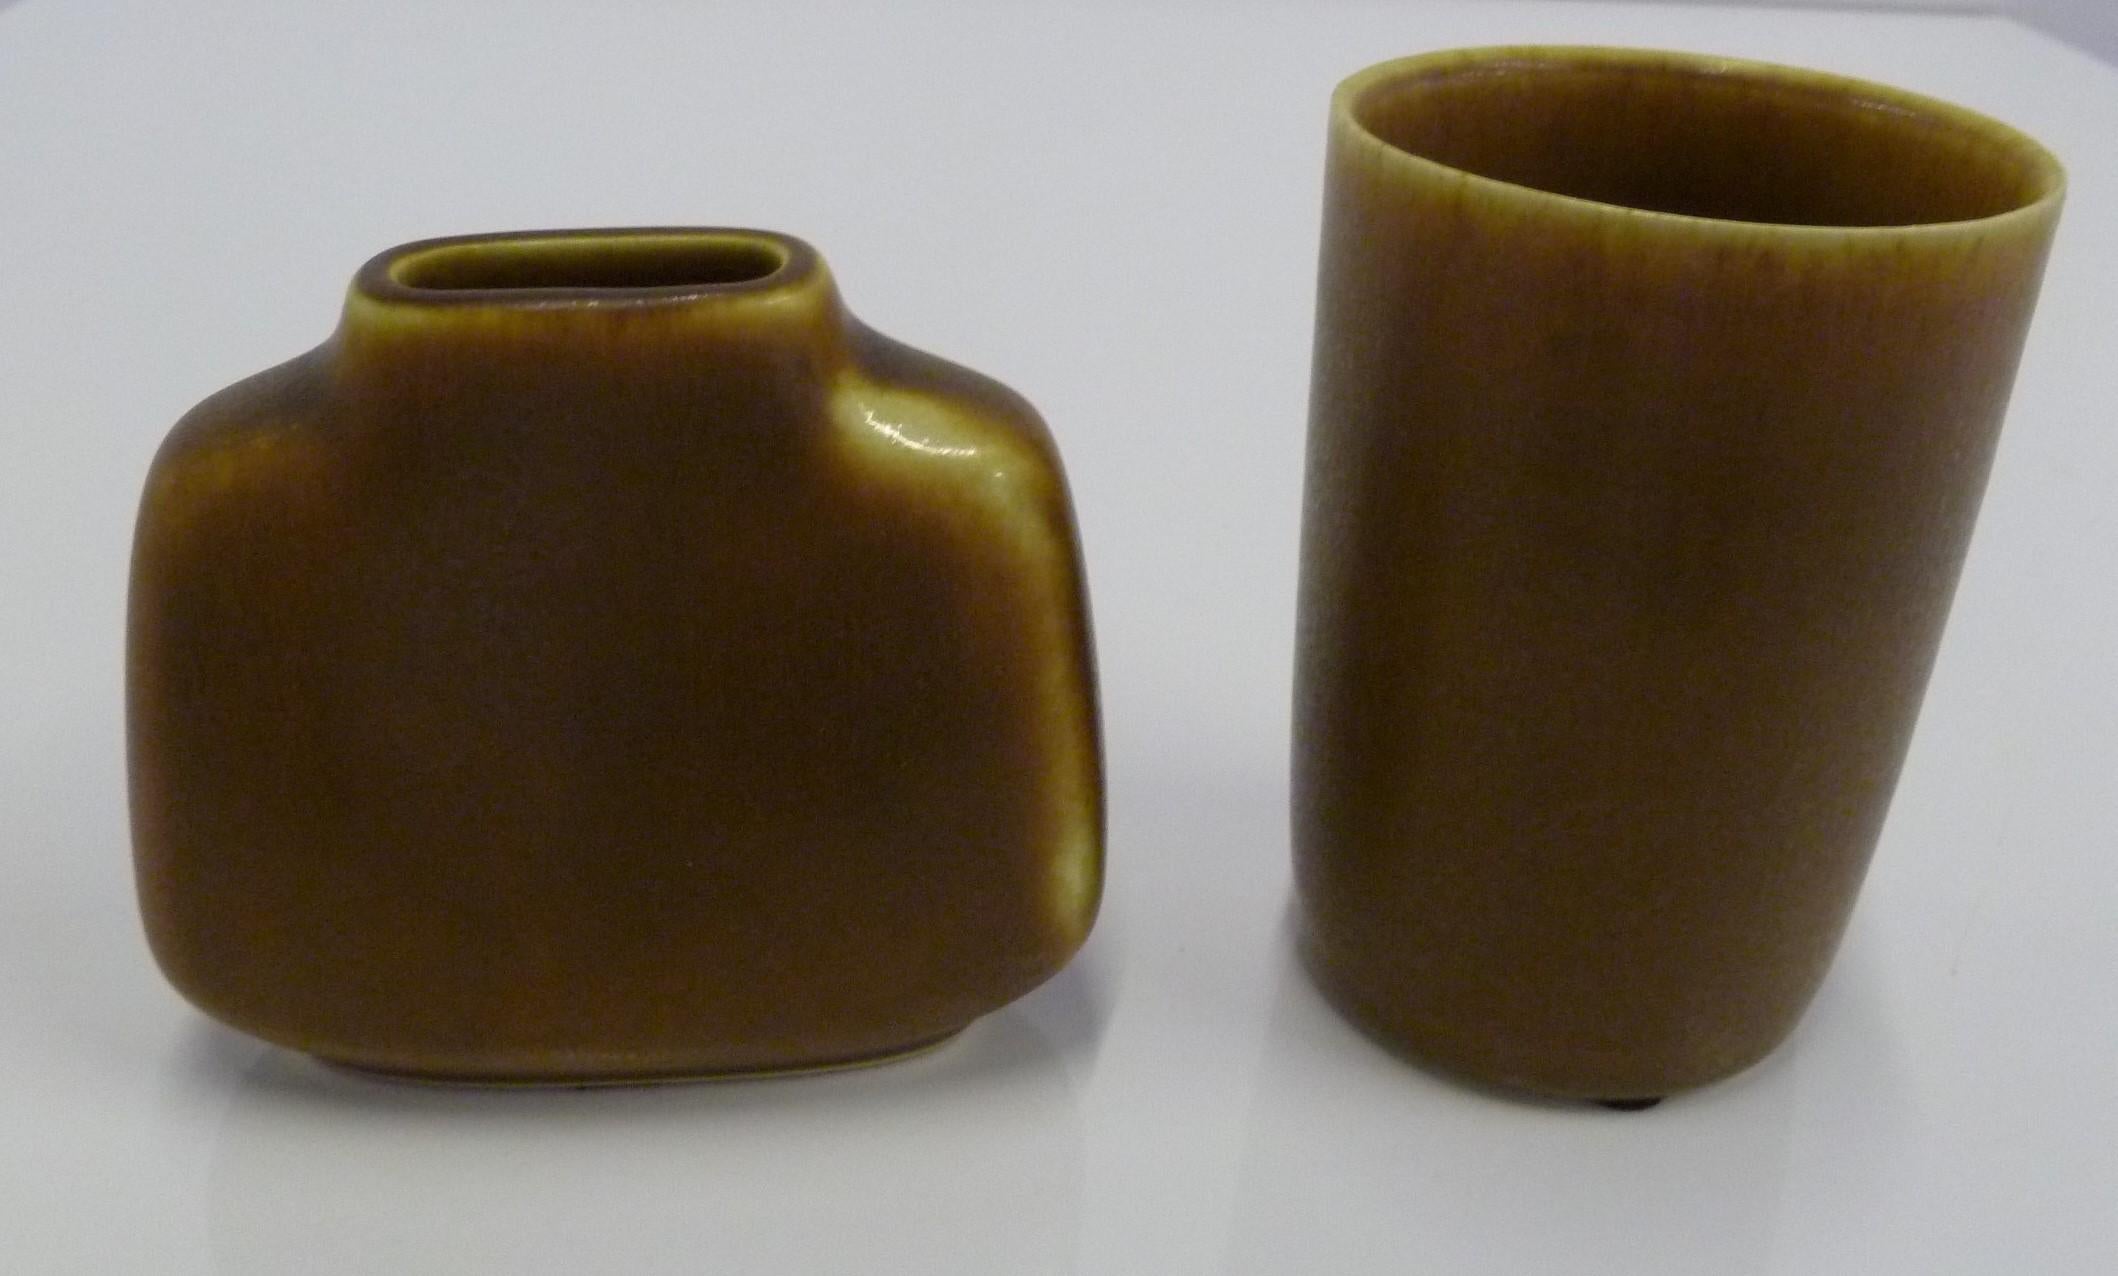 Two Scandinavian Modern Danish hand thrown Pottery Vases by Per and Annelise Linnemann-Schmidt for Palshus from the 1960s. Lovely simple shapes with a soft smooth feel of the mottled tan glaze over a cream colored body. In excellent condition, no